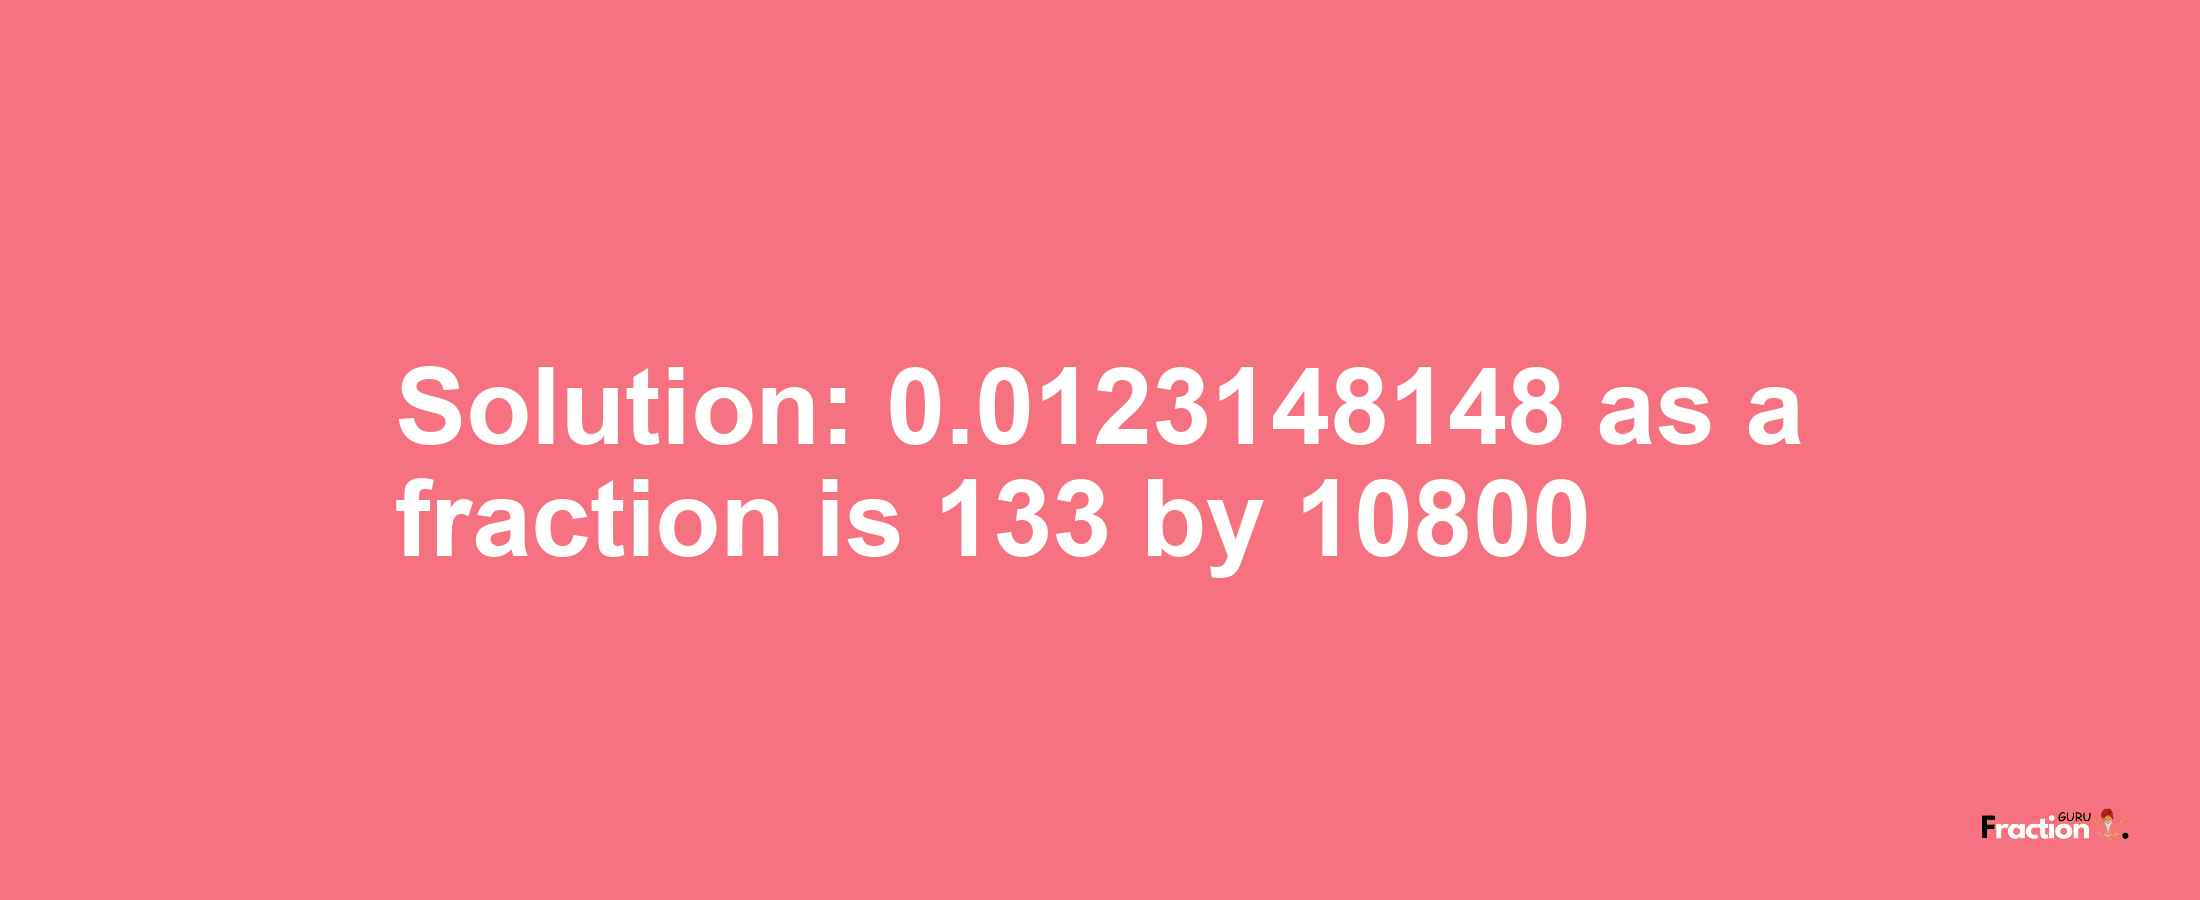 Solution:0.0123148148 as a fraction is 133/10800